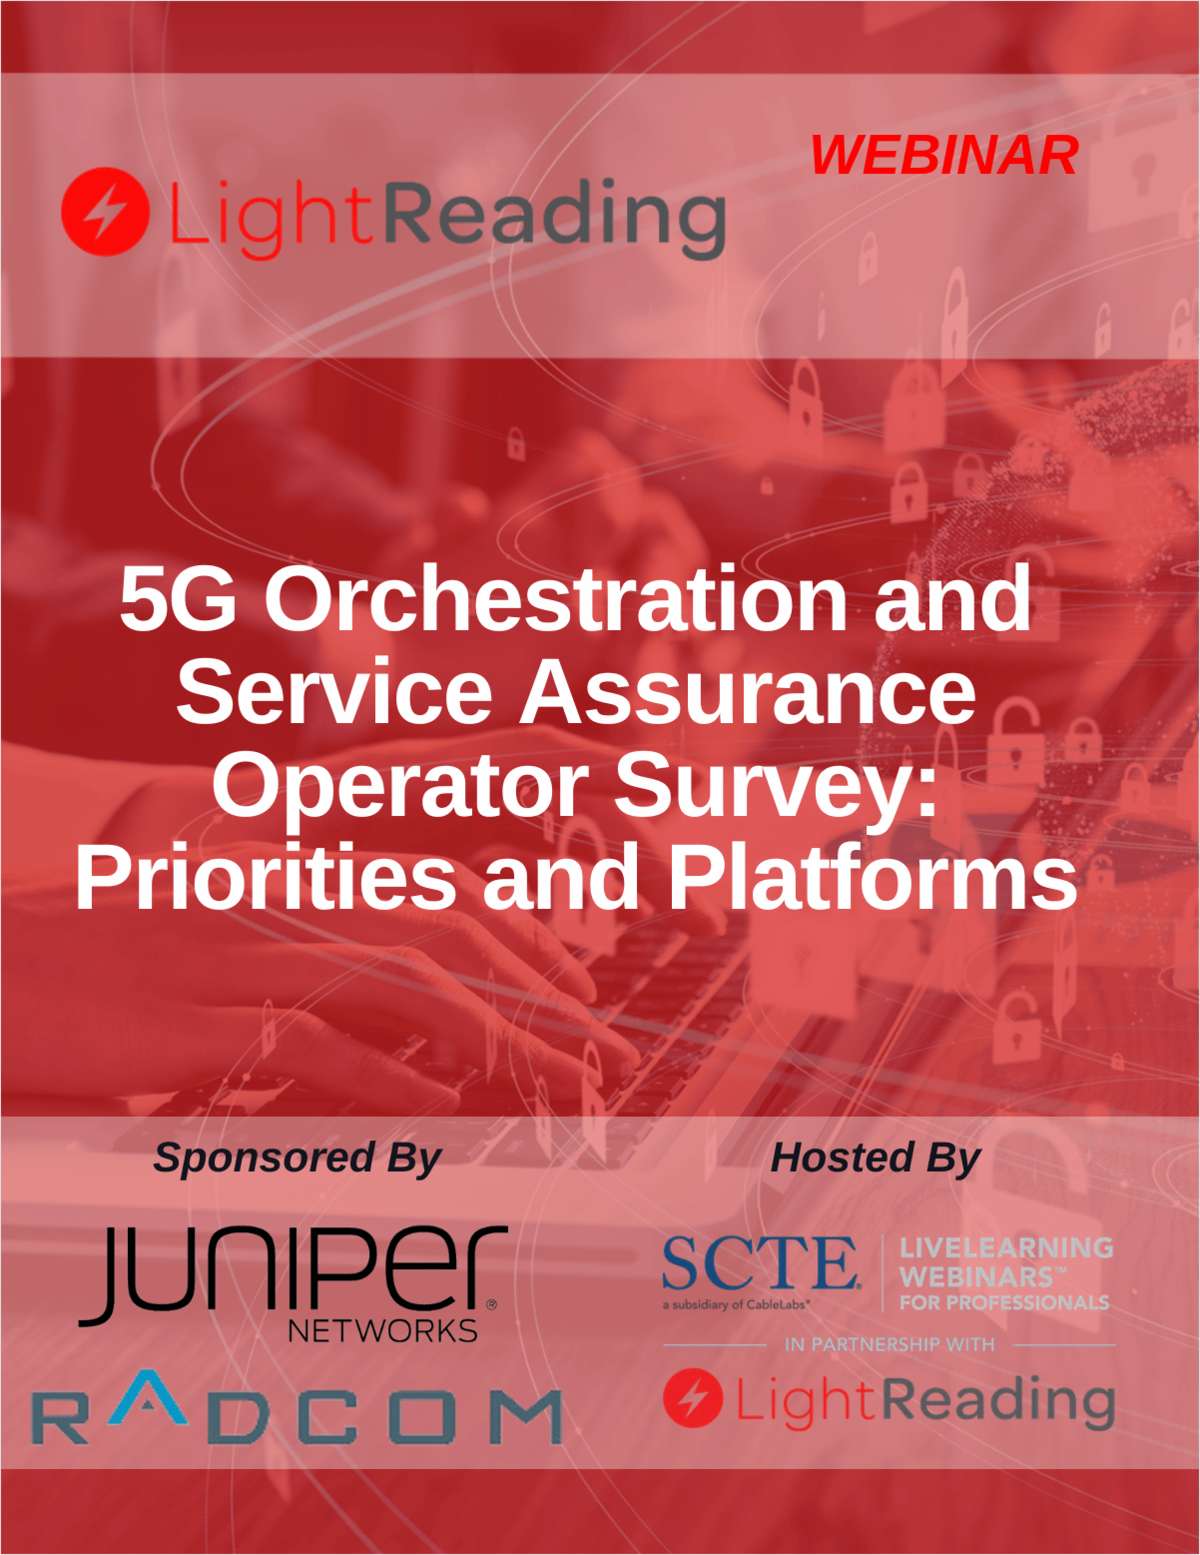 5G Orchestration and Service Assurance Operator Survey: Priorities and Platforms